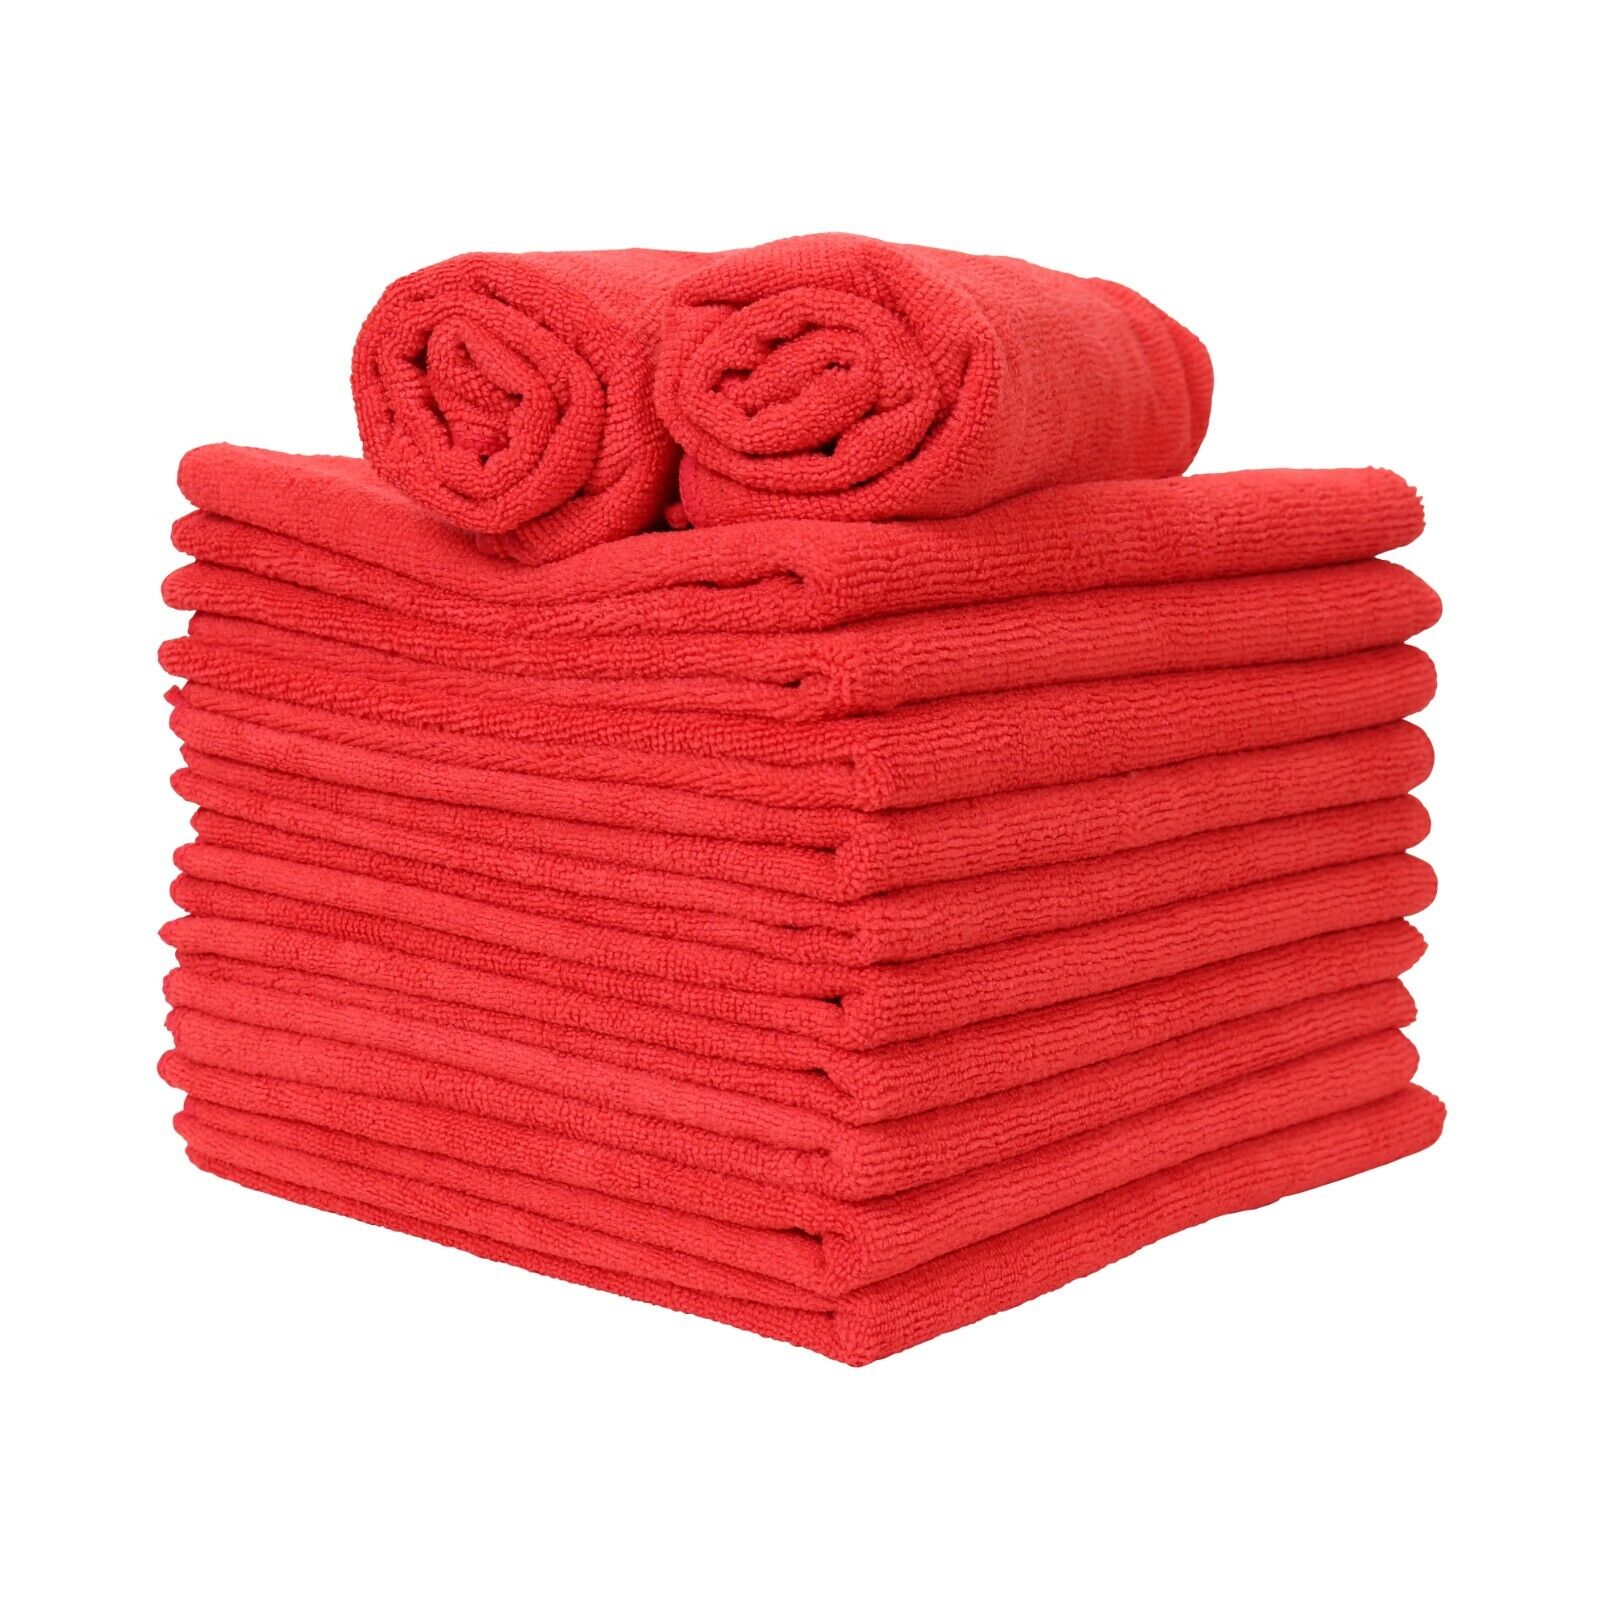 Microfiber Hand Towels 12 Packs - 16 x 27 Soft Reusable Absorbent Color Options Arkwright Does Not Apply - фотография #12